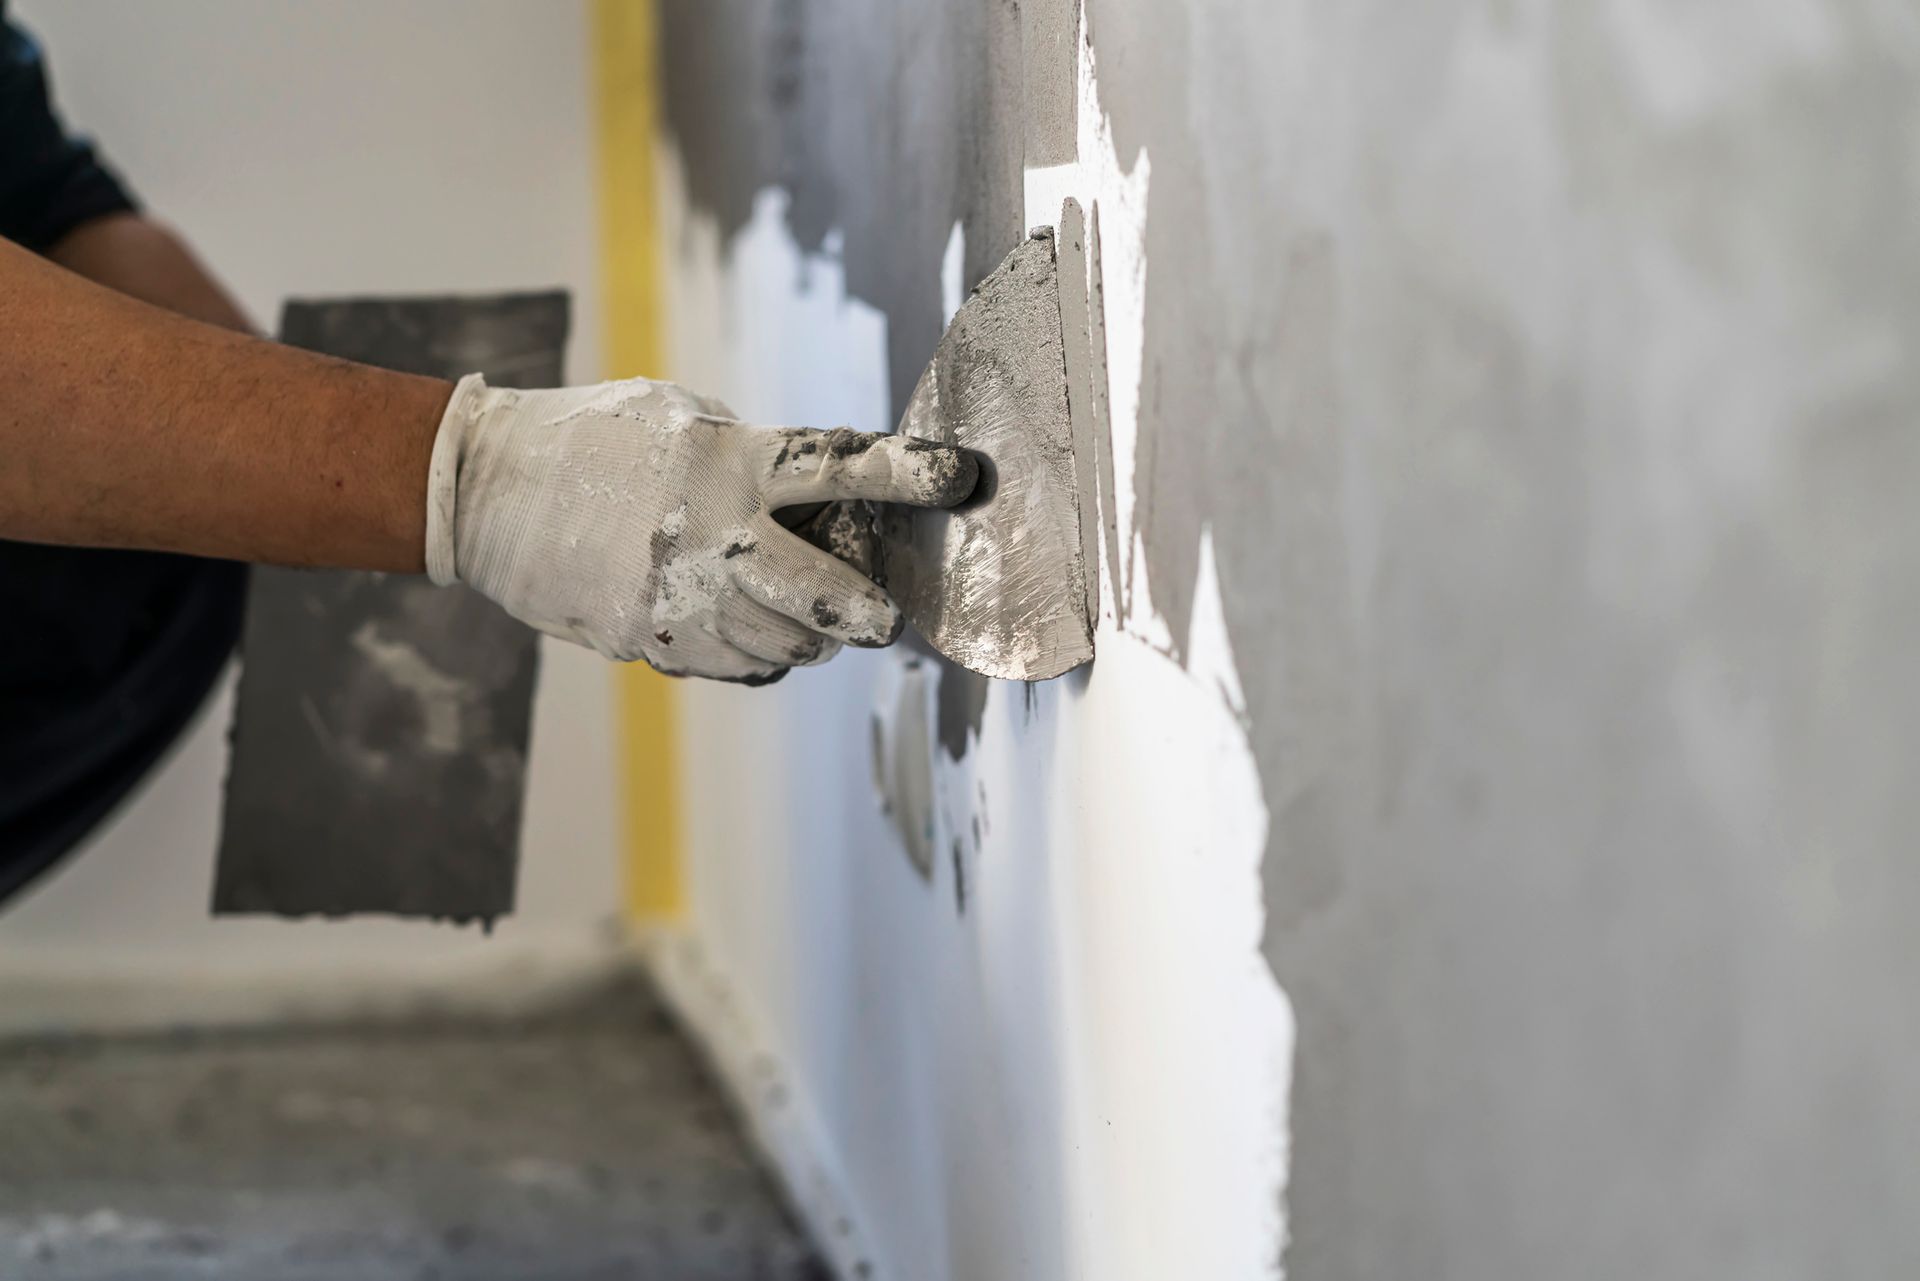 A Man Is Plastering A Wall With A Trowel - Columbus, IN - Orville K. Fleetwood Asphalt